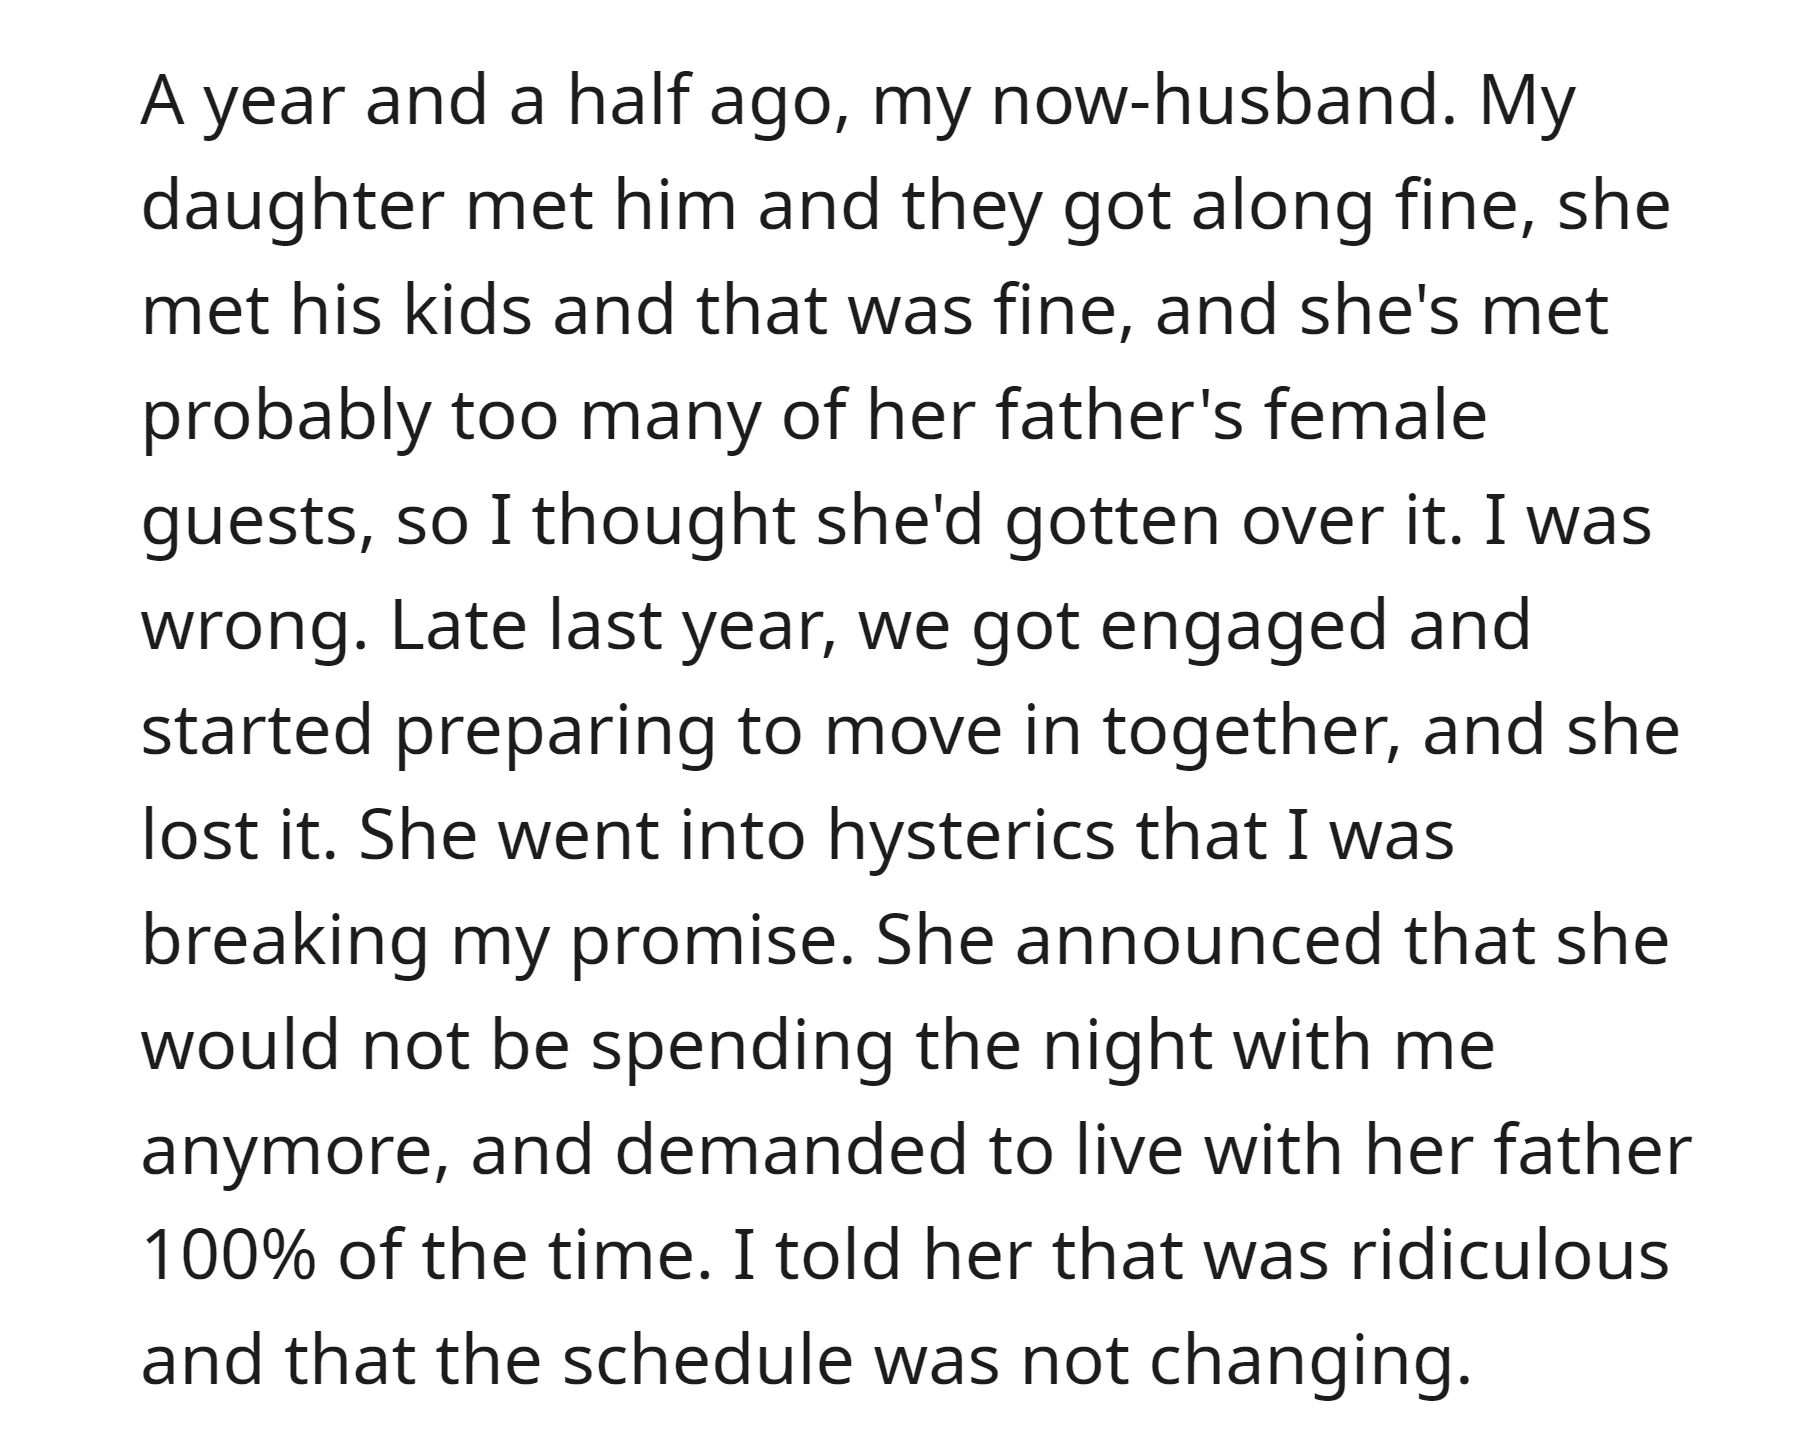 When OP got married with her new husband, her daughter got upset she accused her of breaking promise